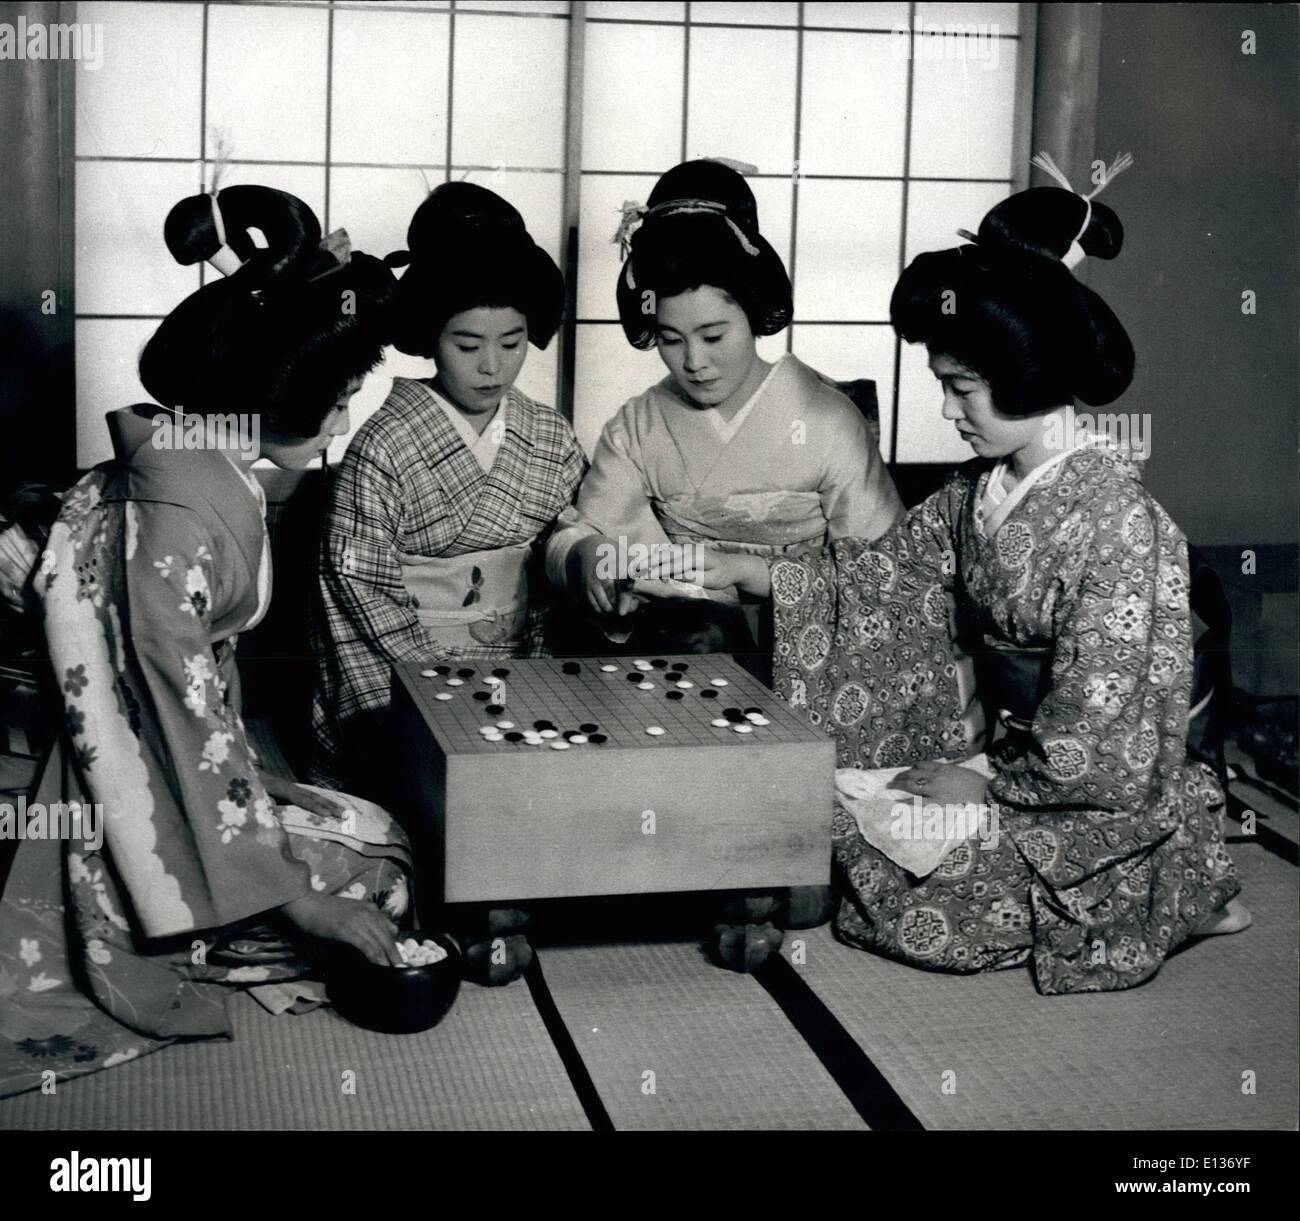 Feb. 28, 2012 - Japanese Geisha girls find the game of ''Go'' entertaining and time-passing. Although only two can play, there's no limit to the number who can watch and offer advice. Stock Photo